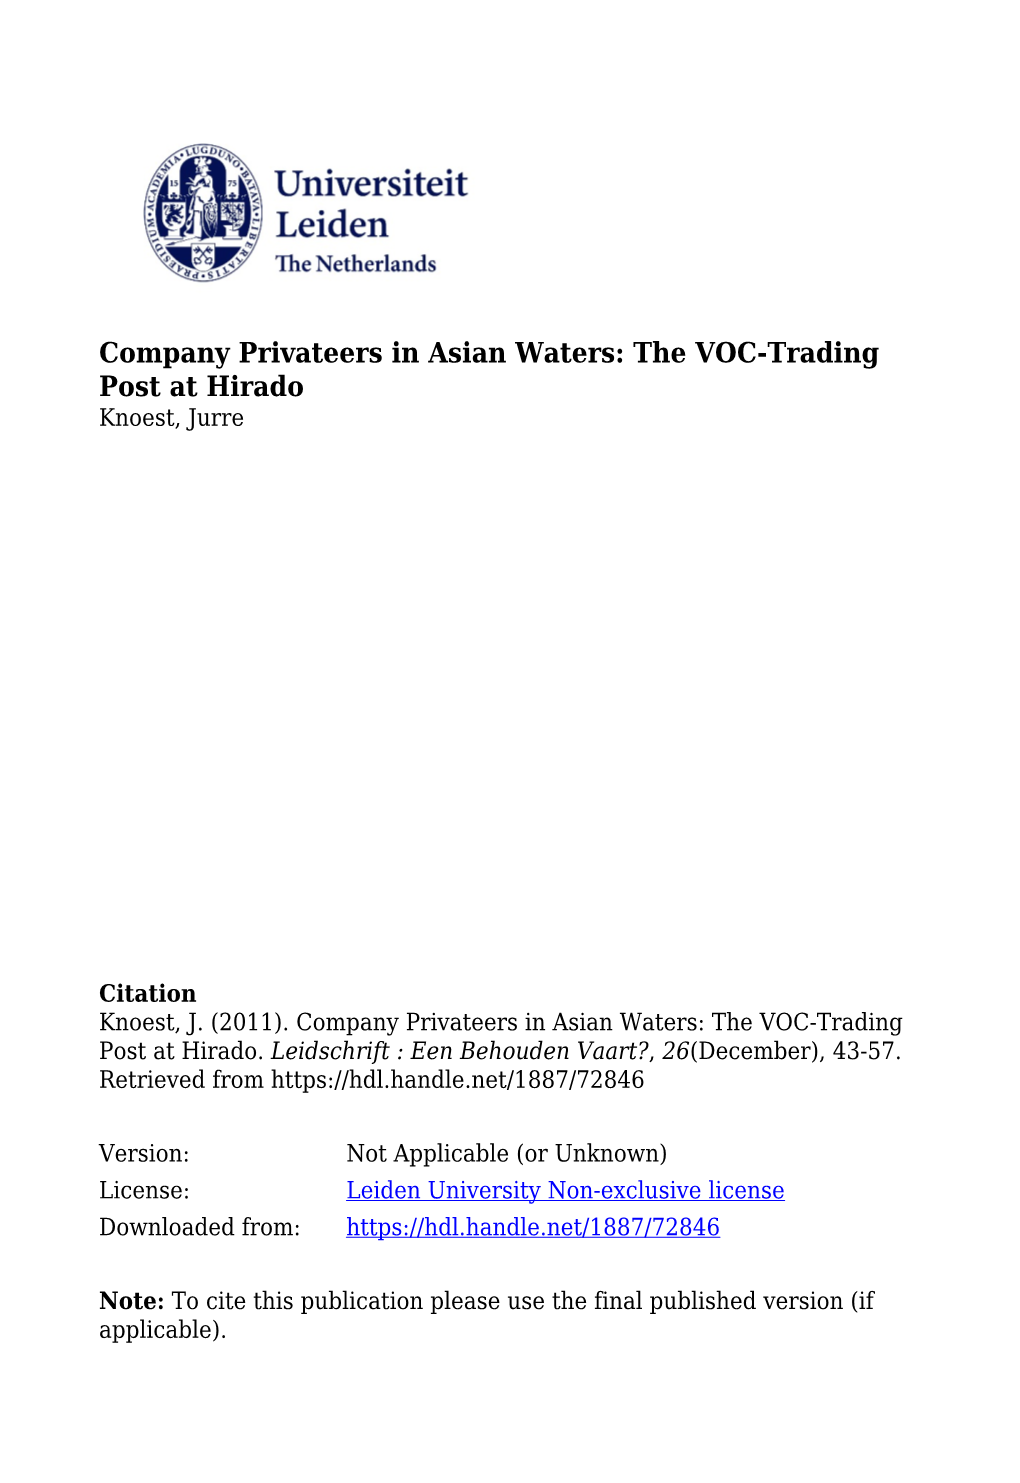 Company Privateers in Asian Waters: the VOC-Trading Post at Hirado Knoest, Jurre